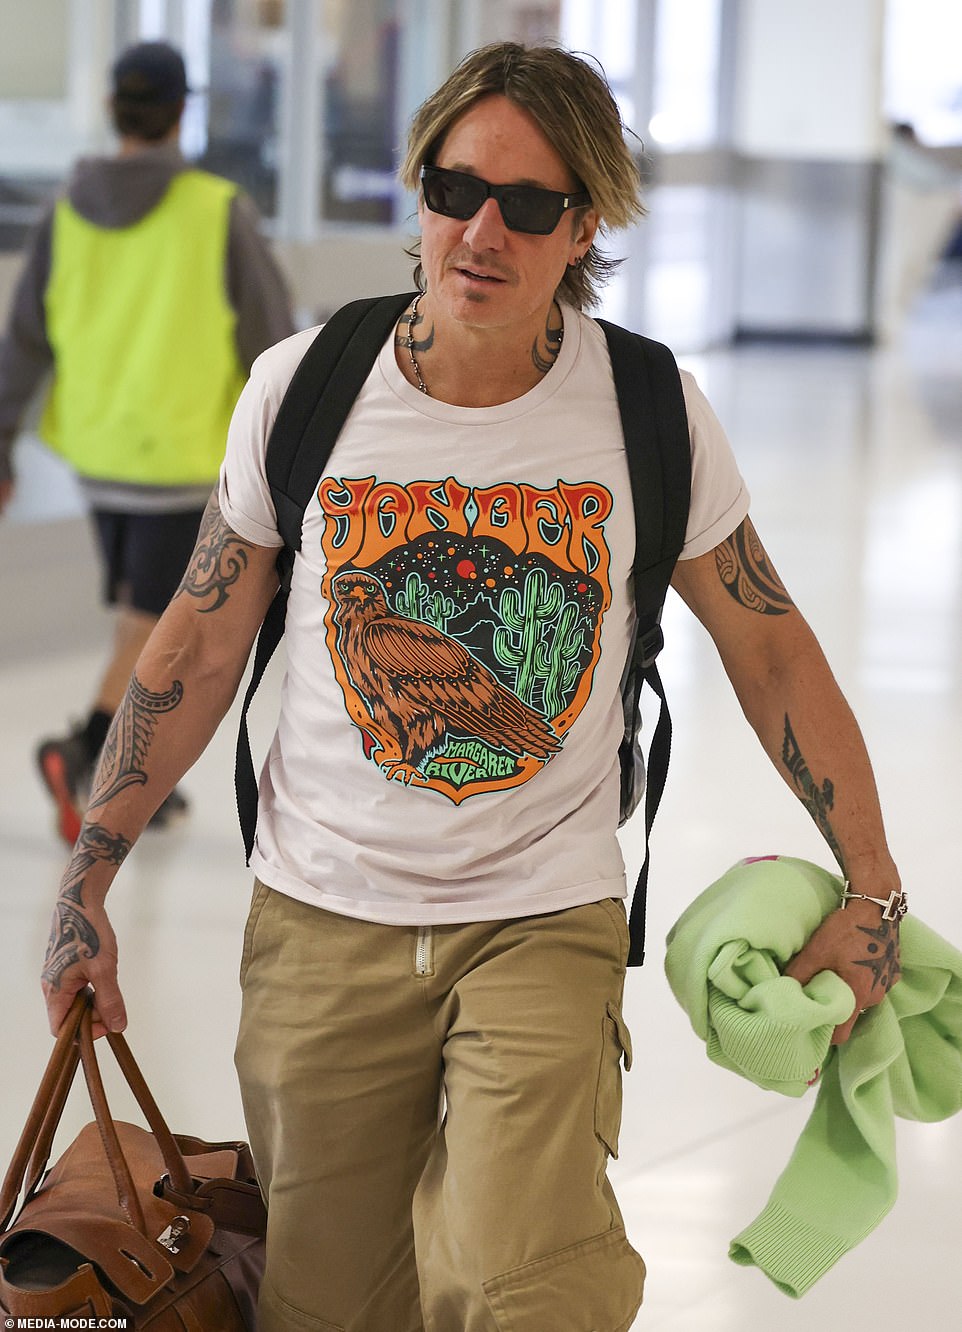 Keith looked casual in cargo pants and a white graphic-print T-shirt.